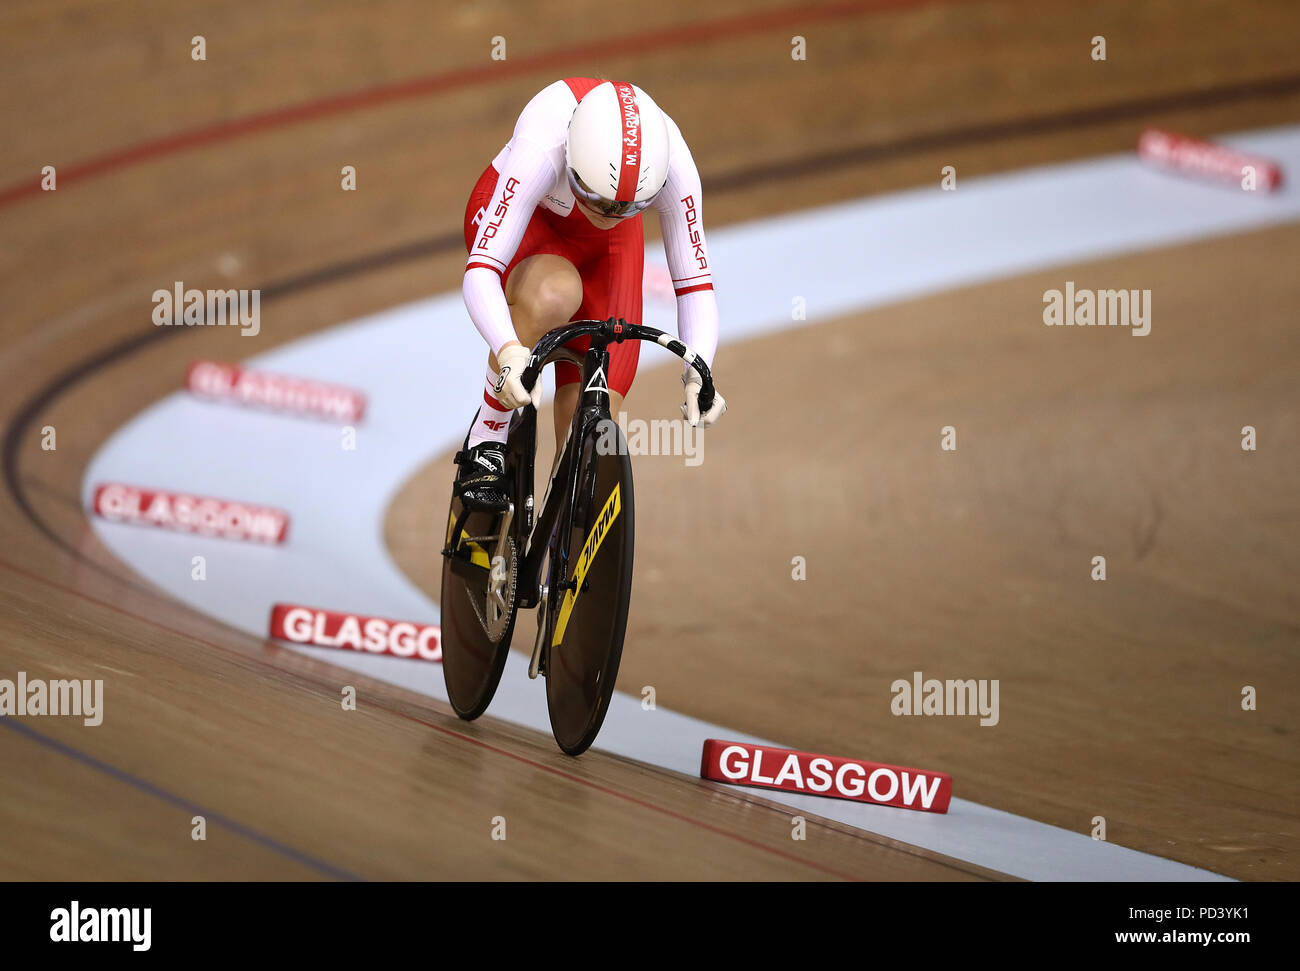 Poland's Marlena Karwacka during the 500m Time Trial Women Qualifying during day five of the 2018 European Championships at the Sir Chris Hoy Velodrome, Glasgow. PRESS ASSOCIATION Photo. Picture date: Monday August 6, 2018. See PA story CYCLING European. Photo credit should read: John Walton/PA Wire. Stock Photo